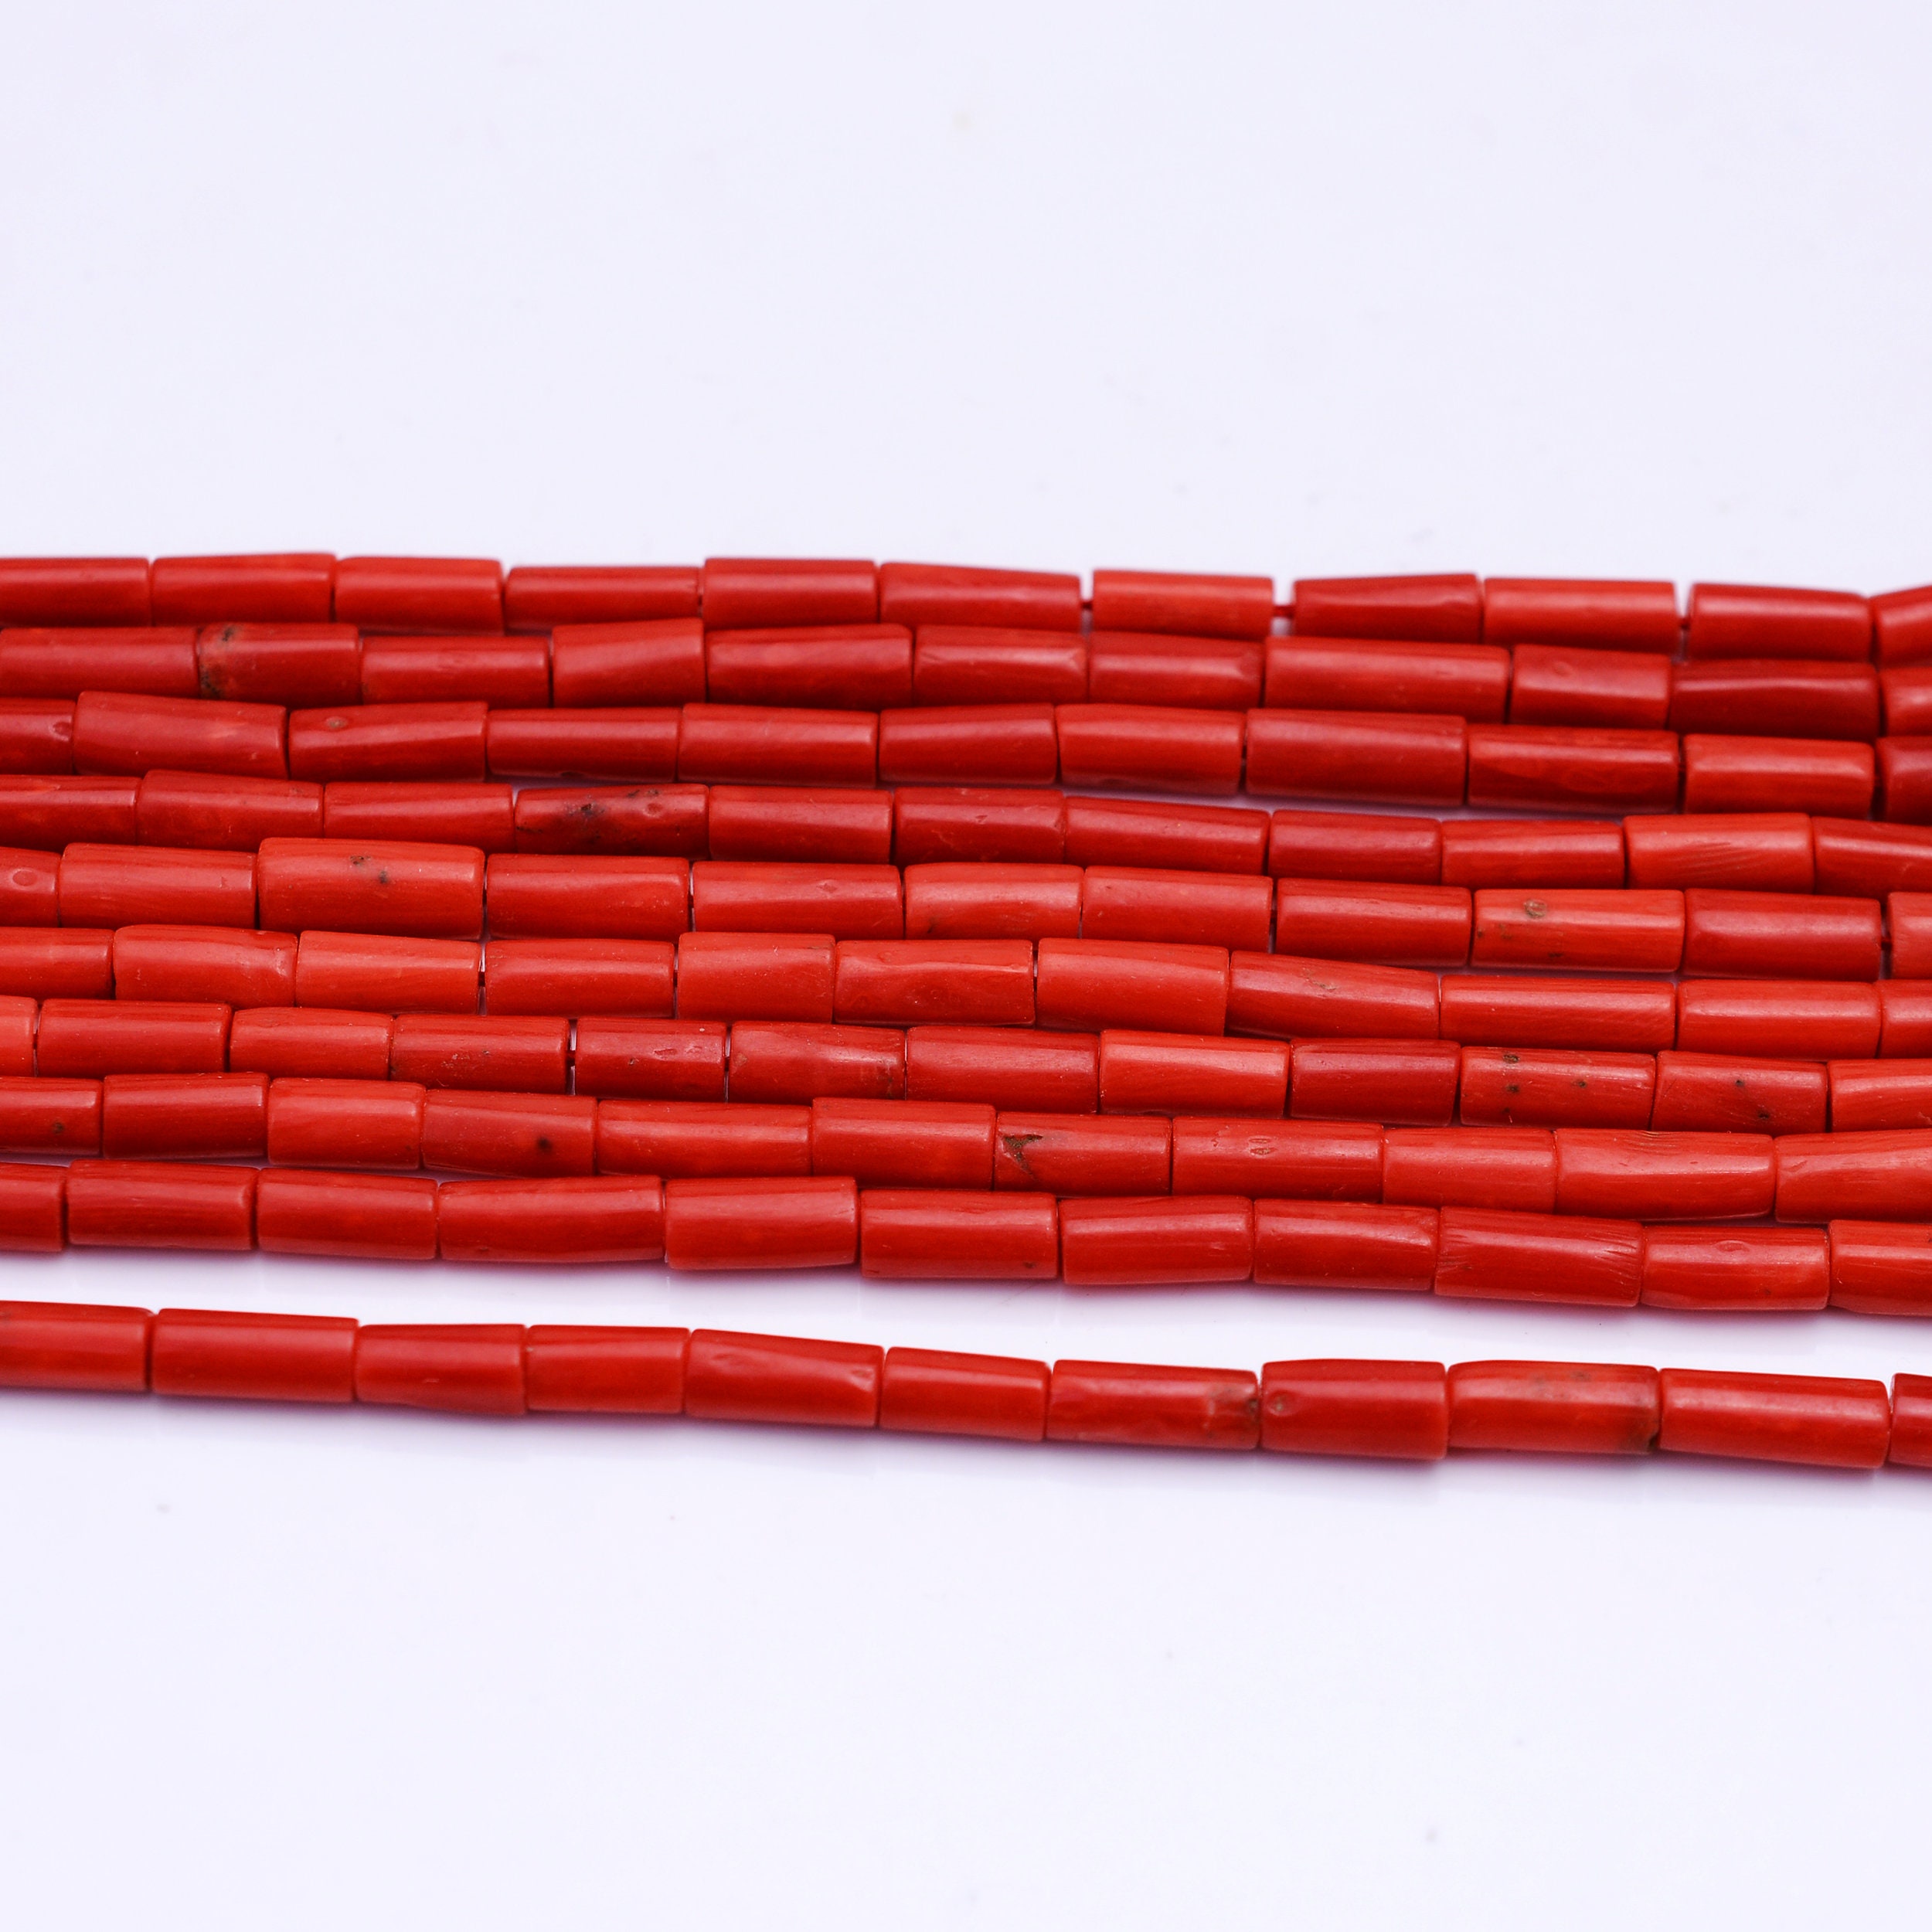 Smooth Tube Shape Gorgeous Red Coral Beads, Size 4x7mm Available, Sold per  String 16 inches Long, Italian Red Coral AAA Quality Gemstones